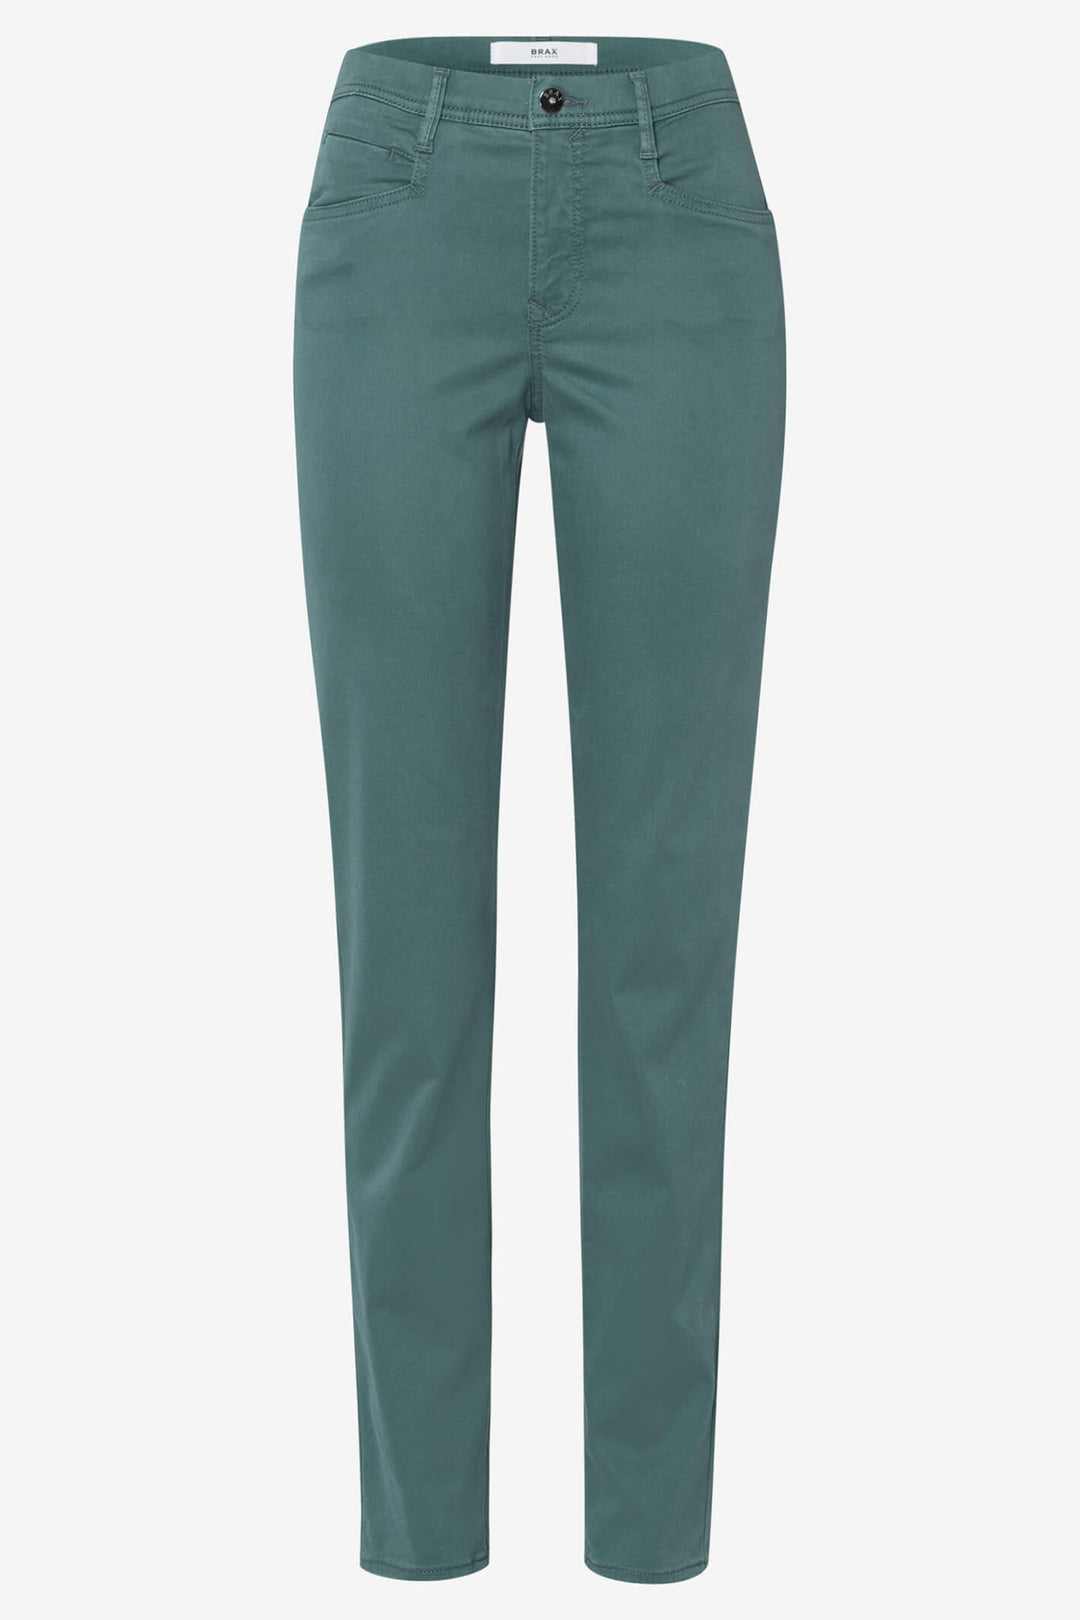 Brax Mary 71-1707 36 Sage Green Slim Fit Jeans - Shirley Allum Boutique